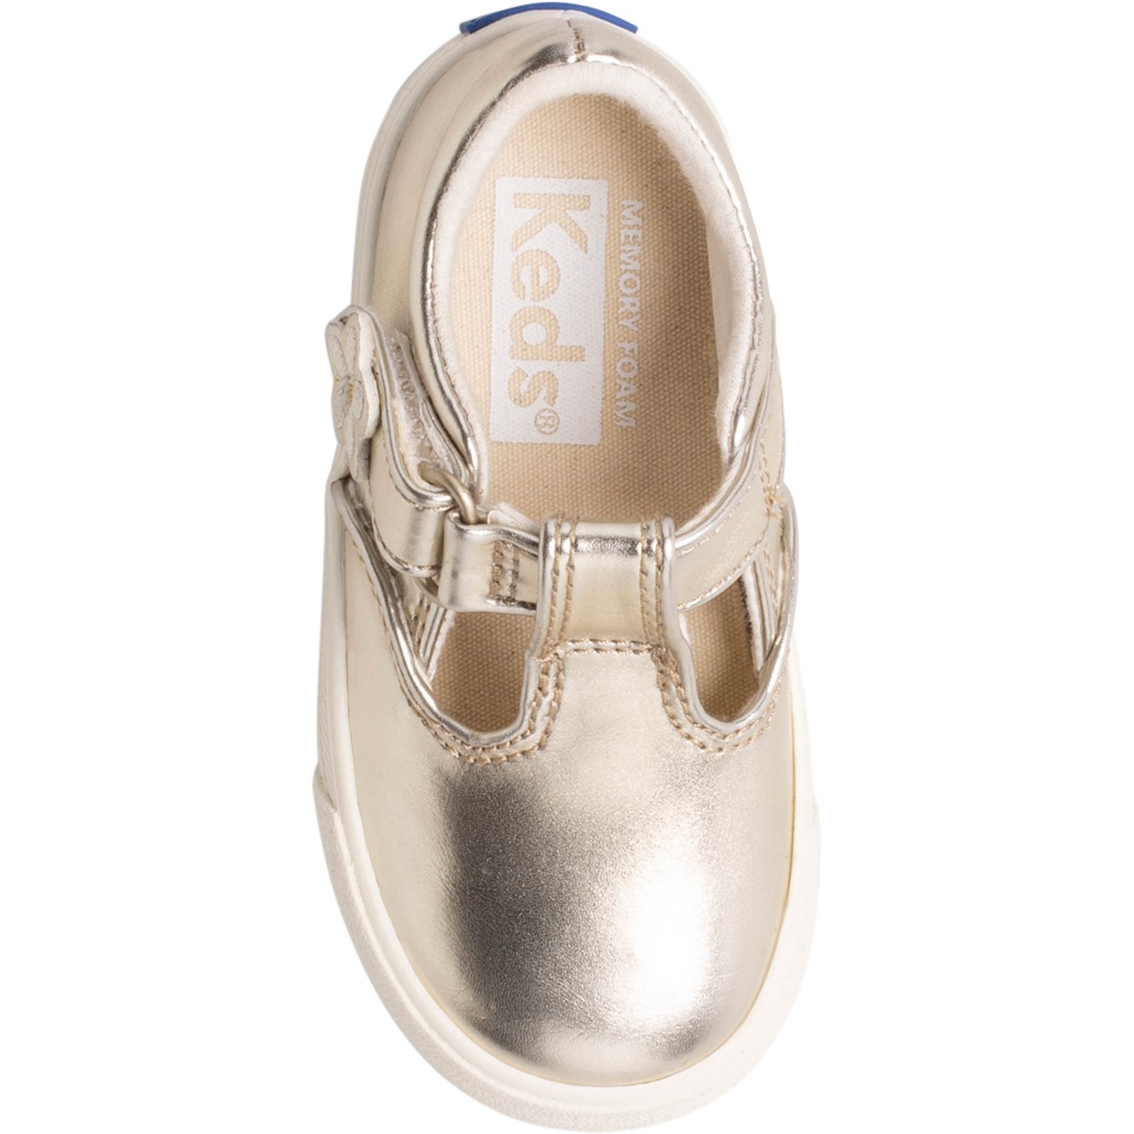 Keds Girls Daphne T Strap Sneakers - Image 4 of 5